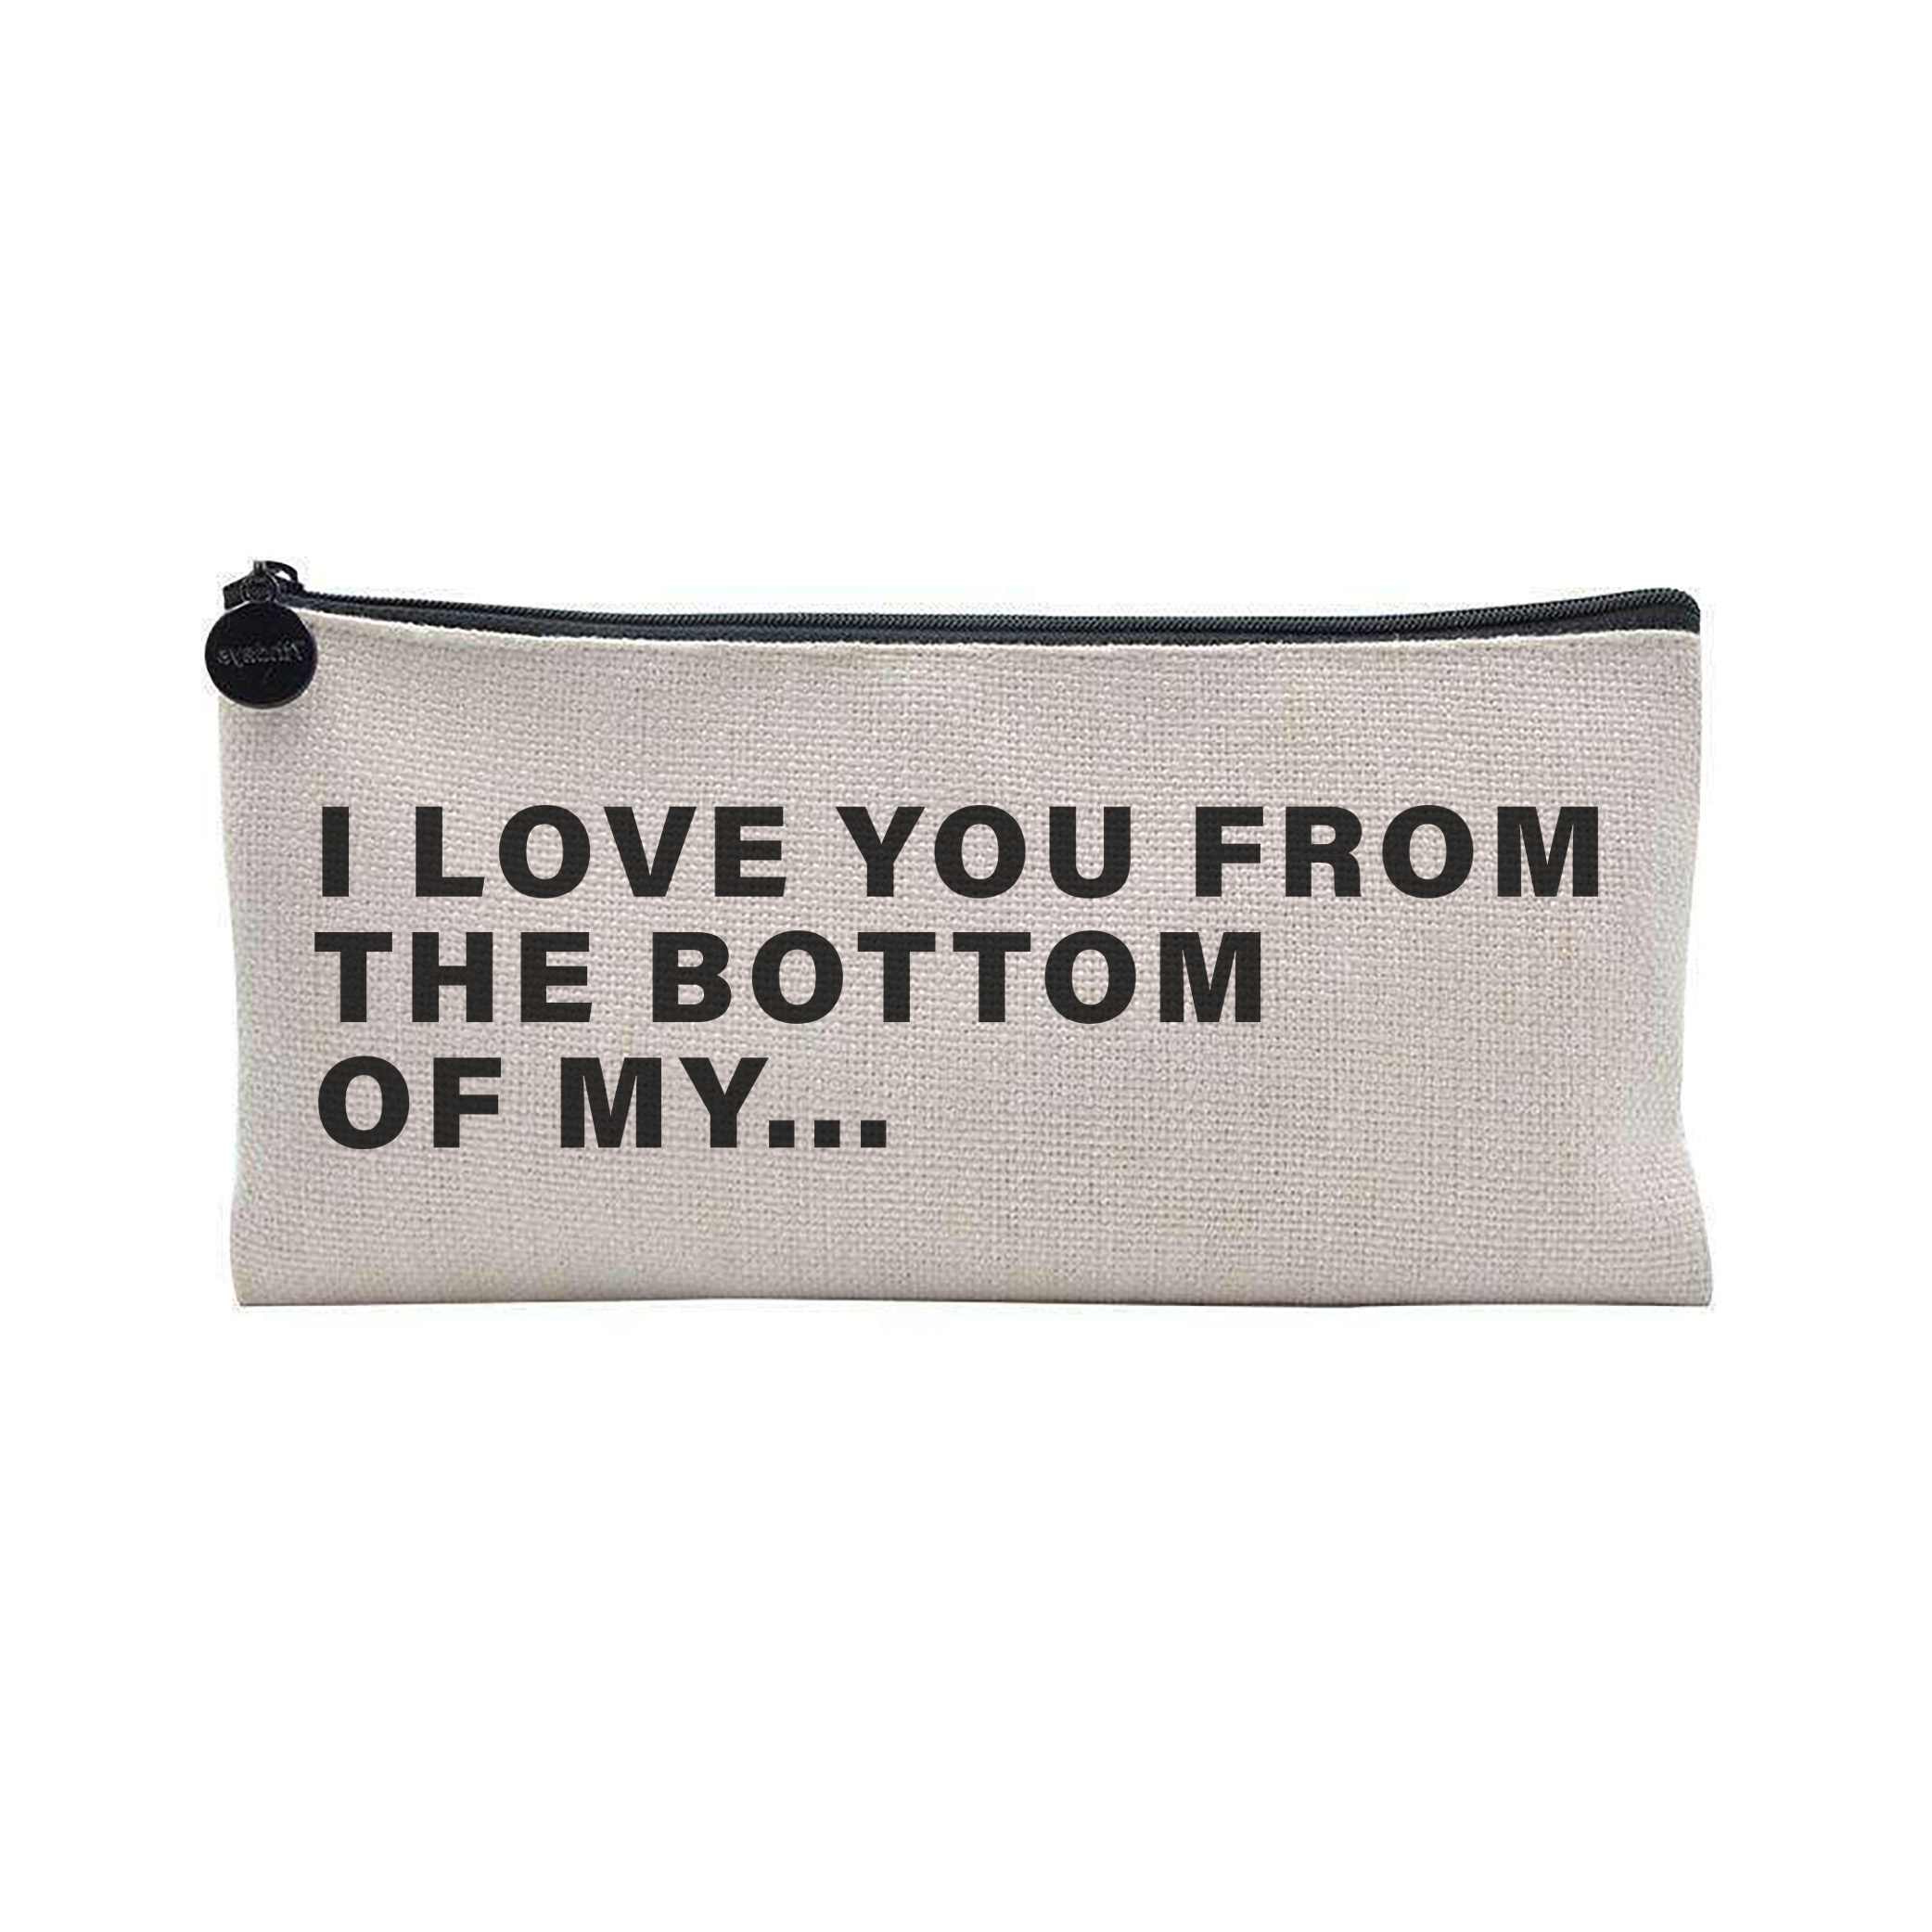 i love you from the bottom of my pencil case